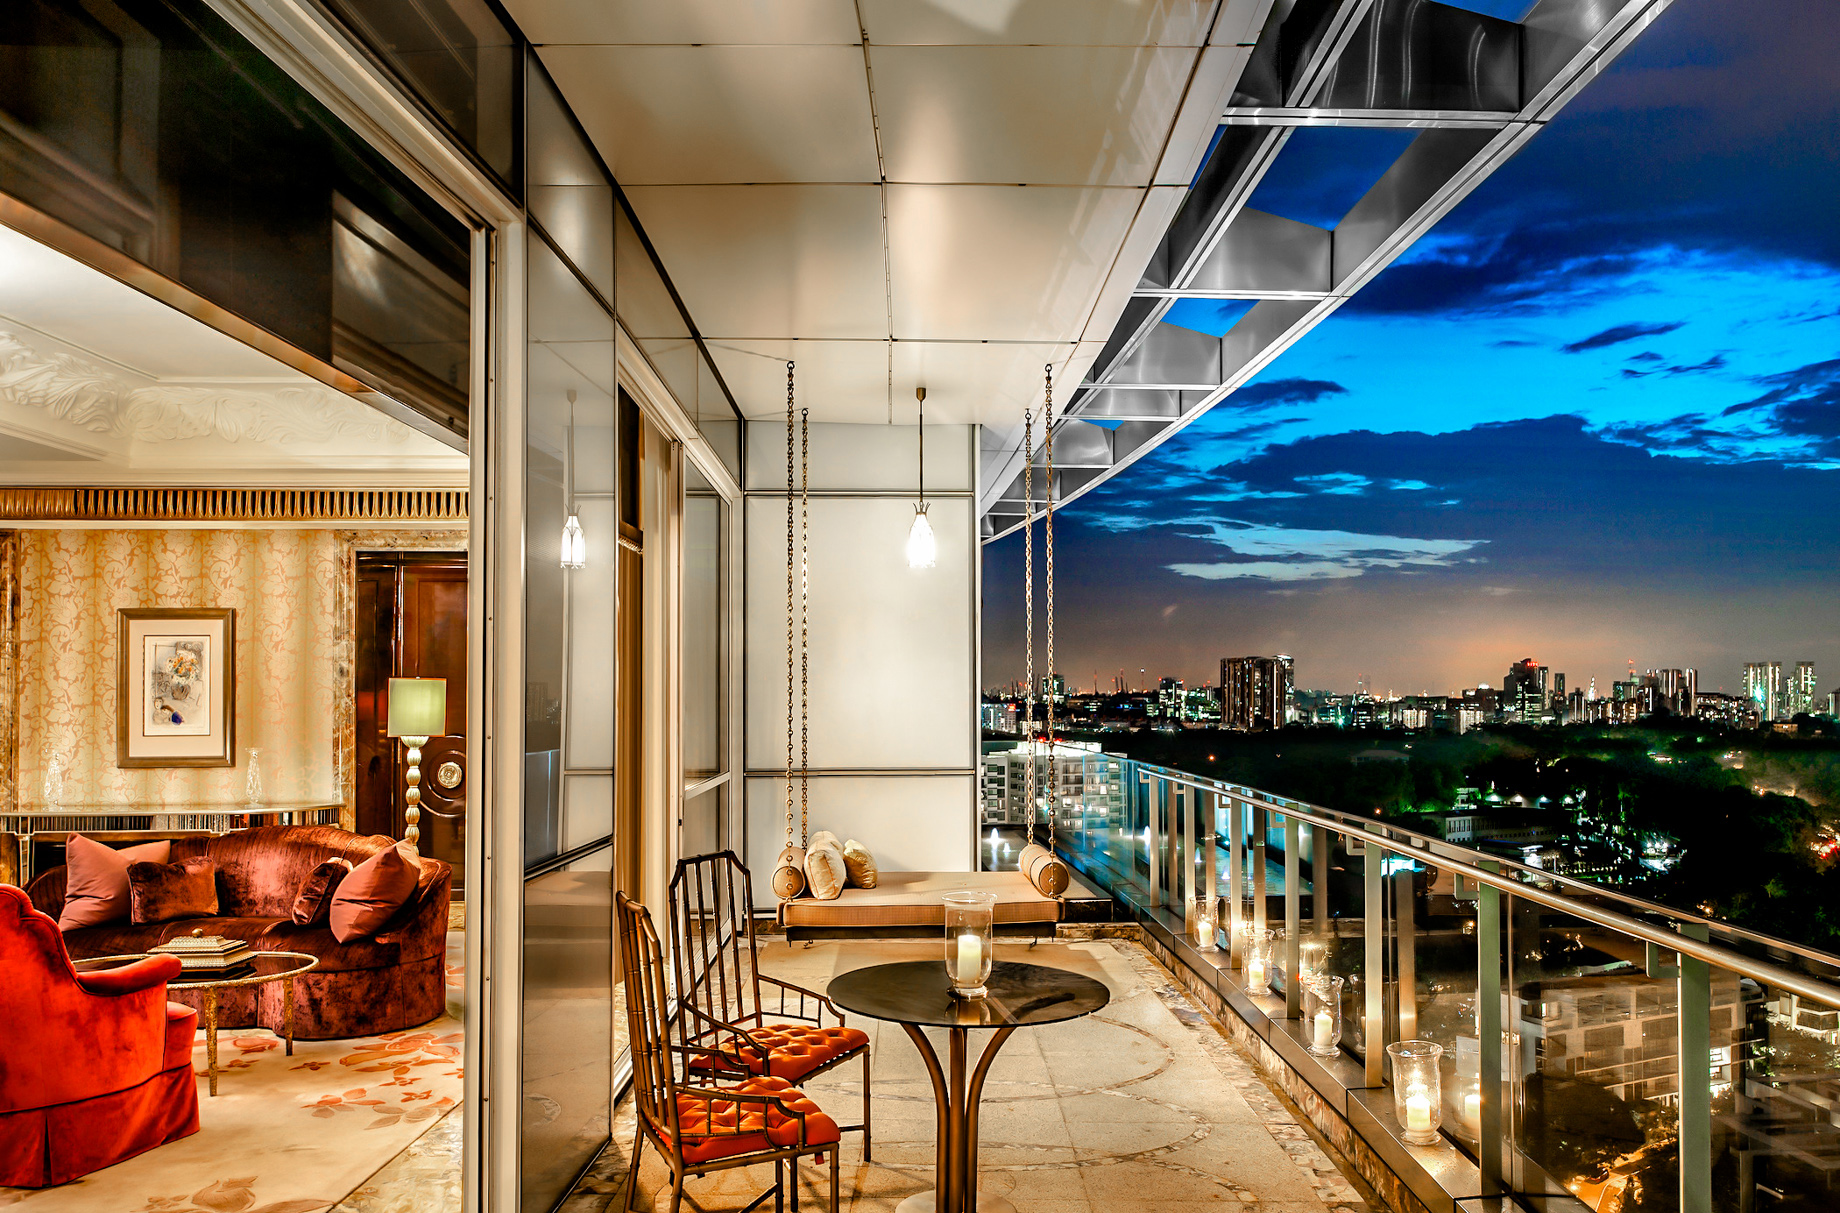 Global Luxury Hotel Market May Exceed $20b by 2022 ...
